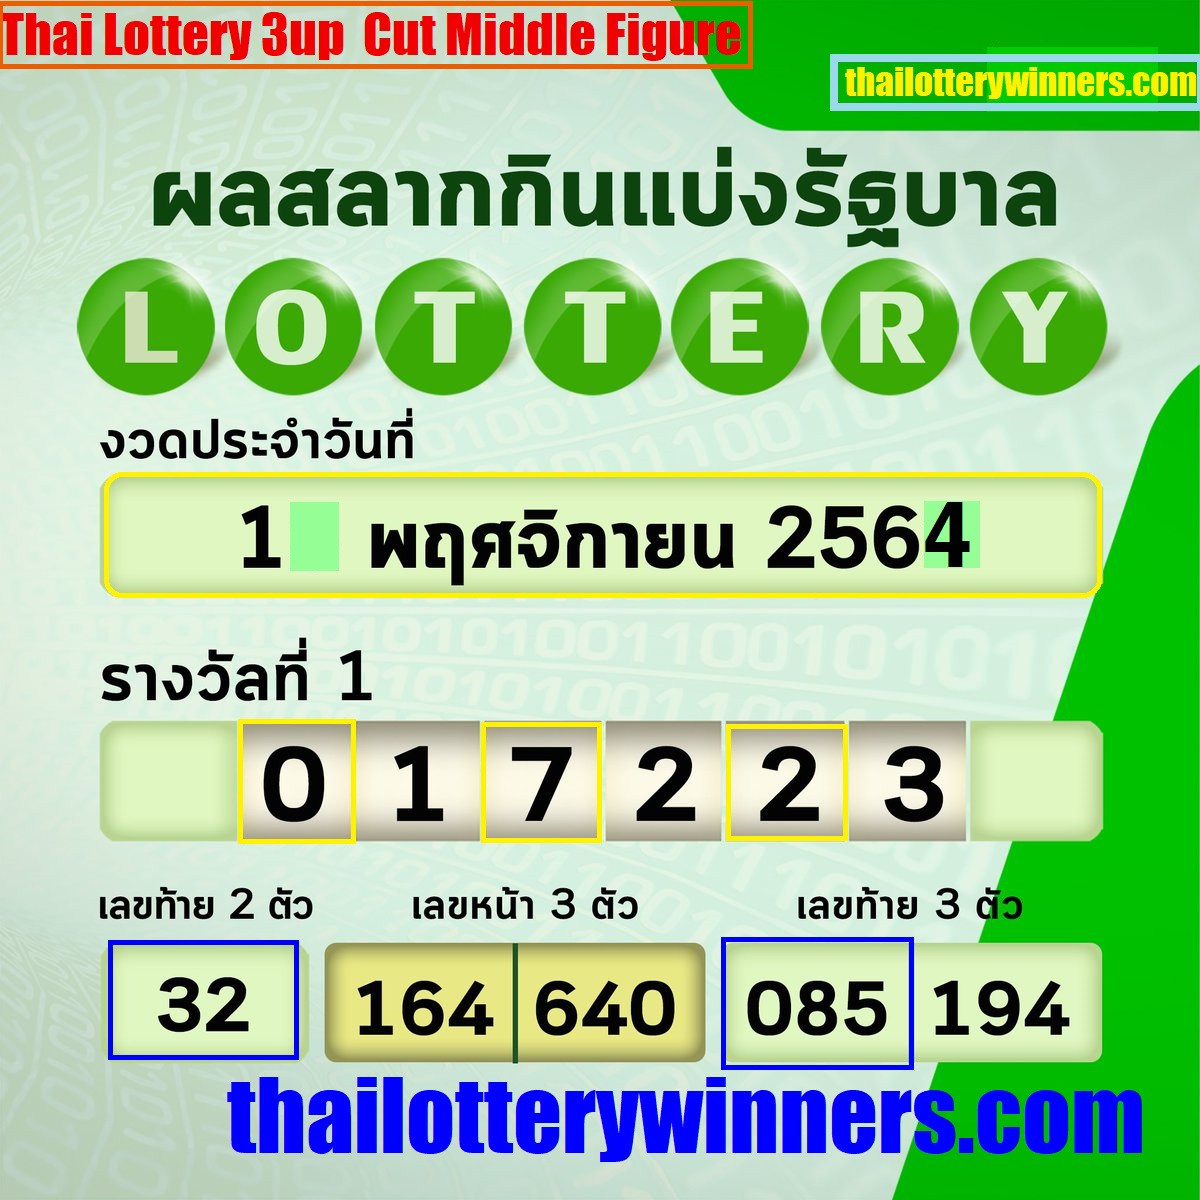 Thai Lottery 3up Sure Digit